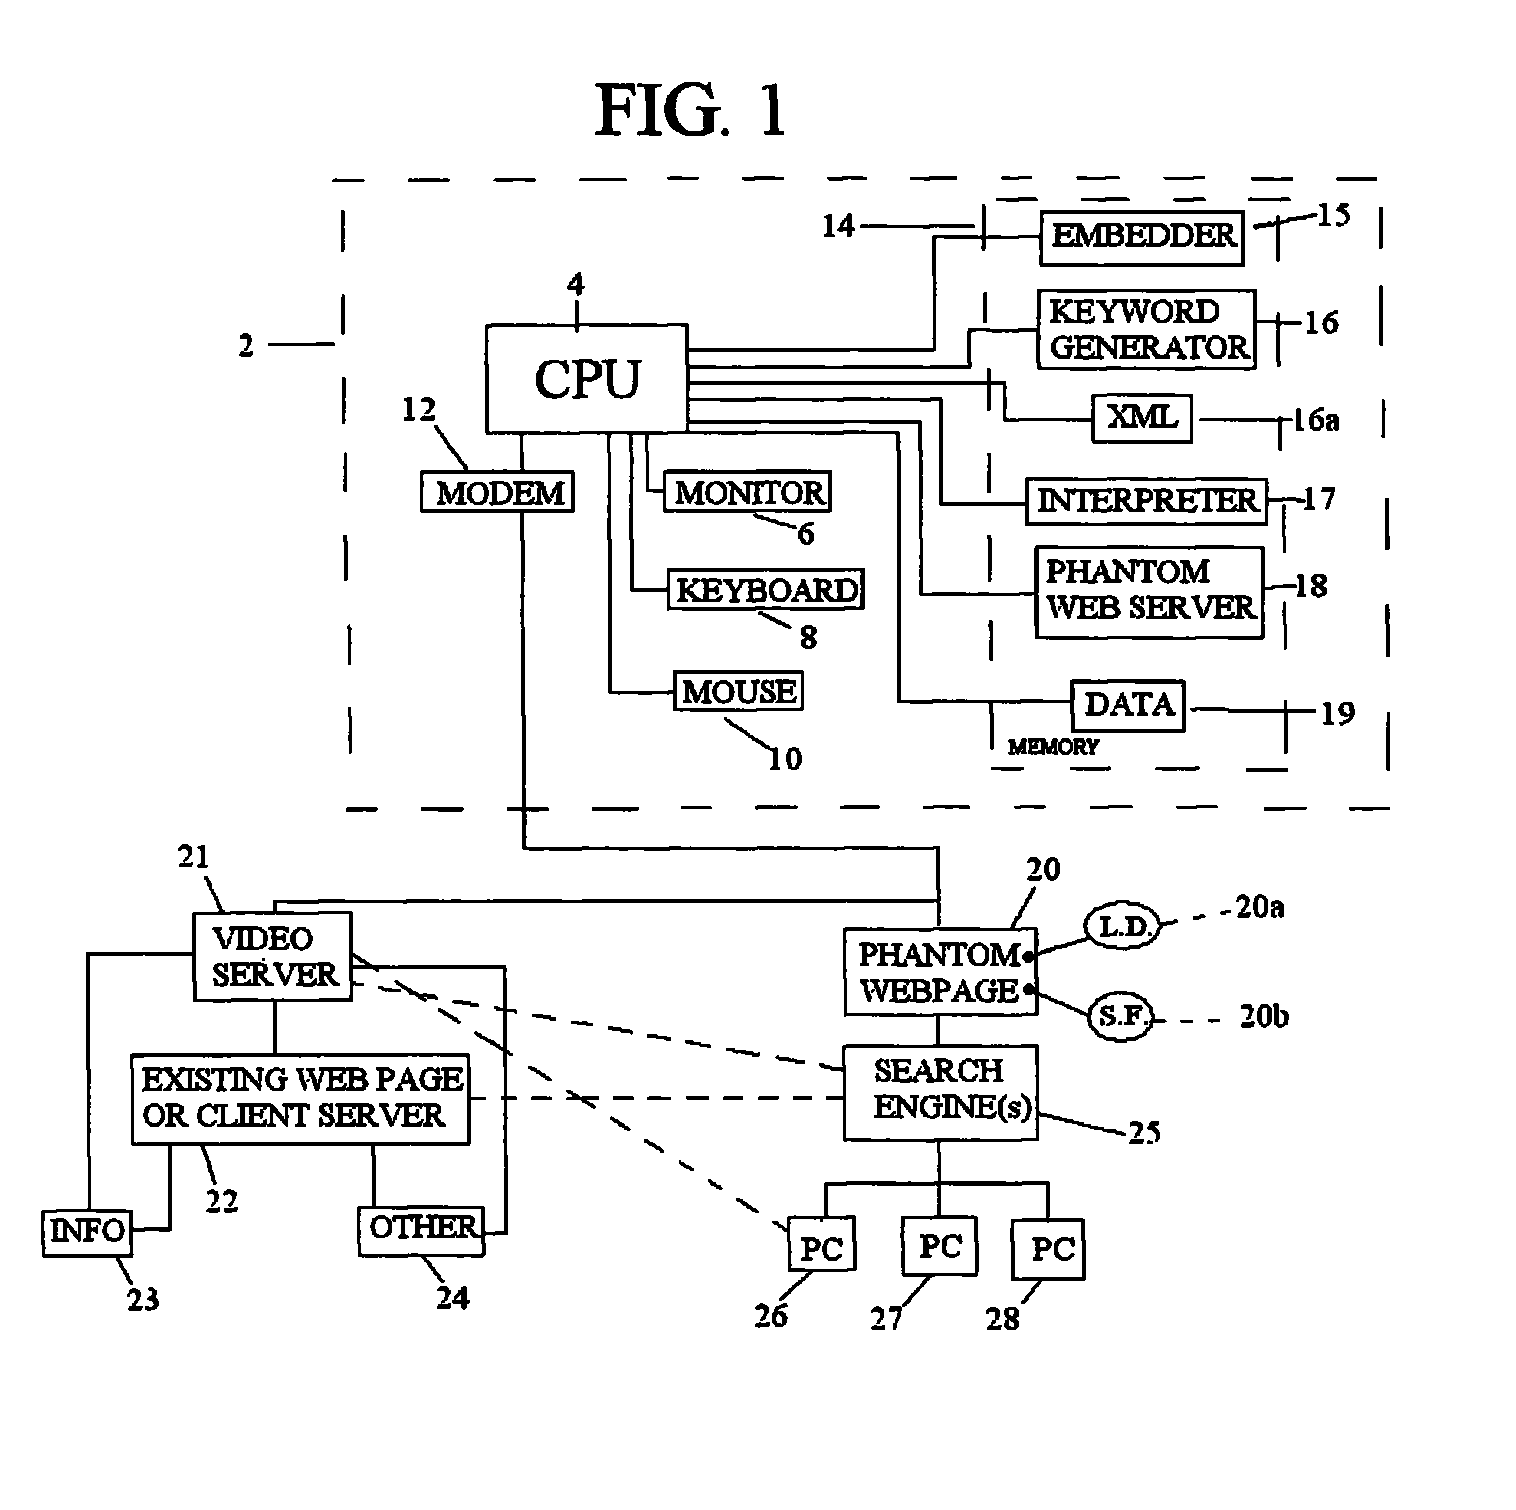 System and method for enabling objects within video to be searched on the internet or intranet